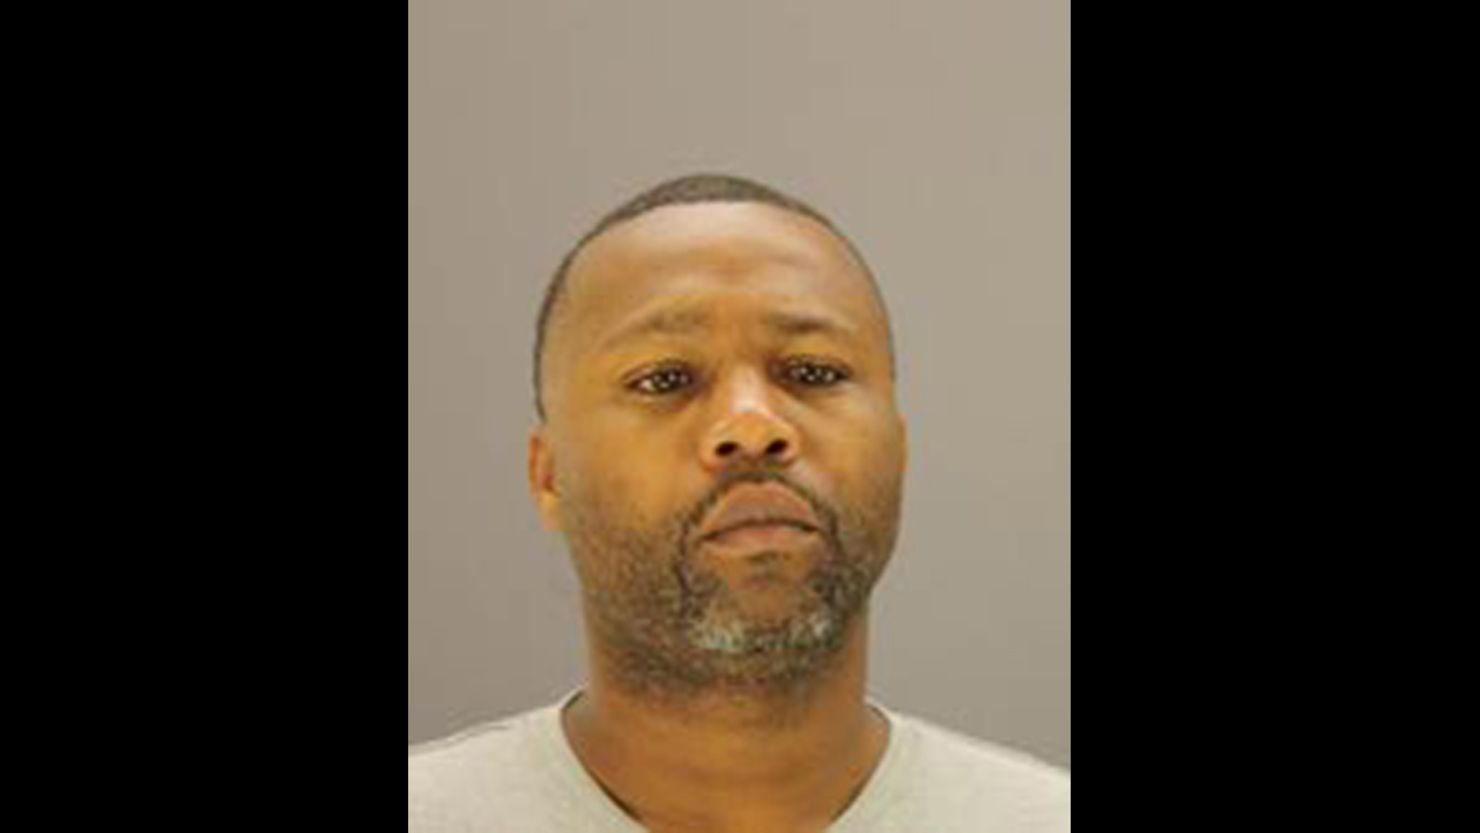 Van Dixson, 38, is suspected in a series of sexual assaults in Dallas.